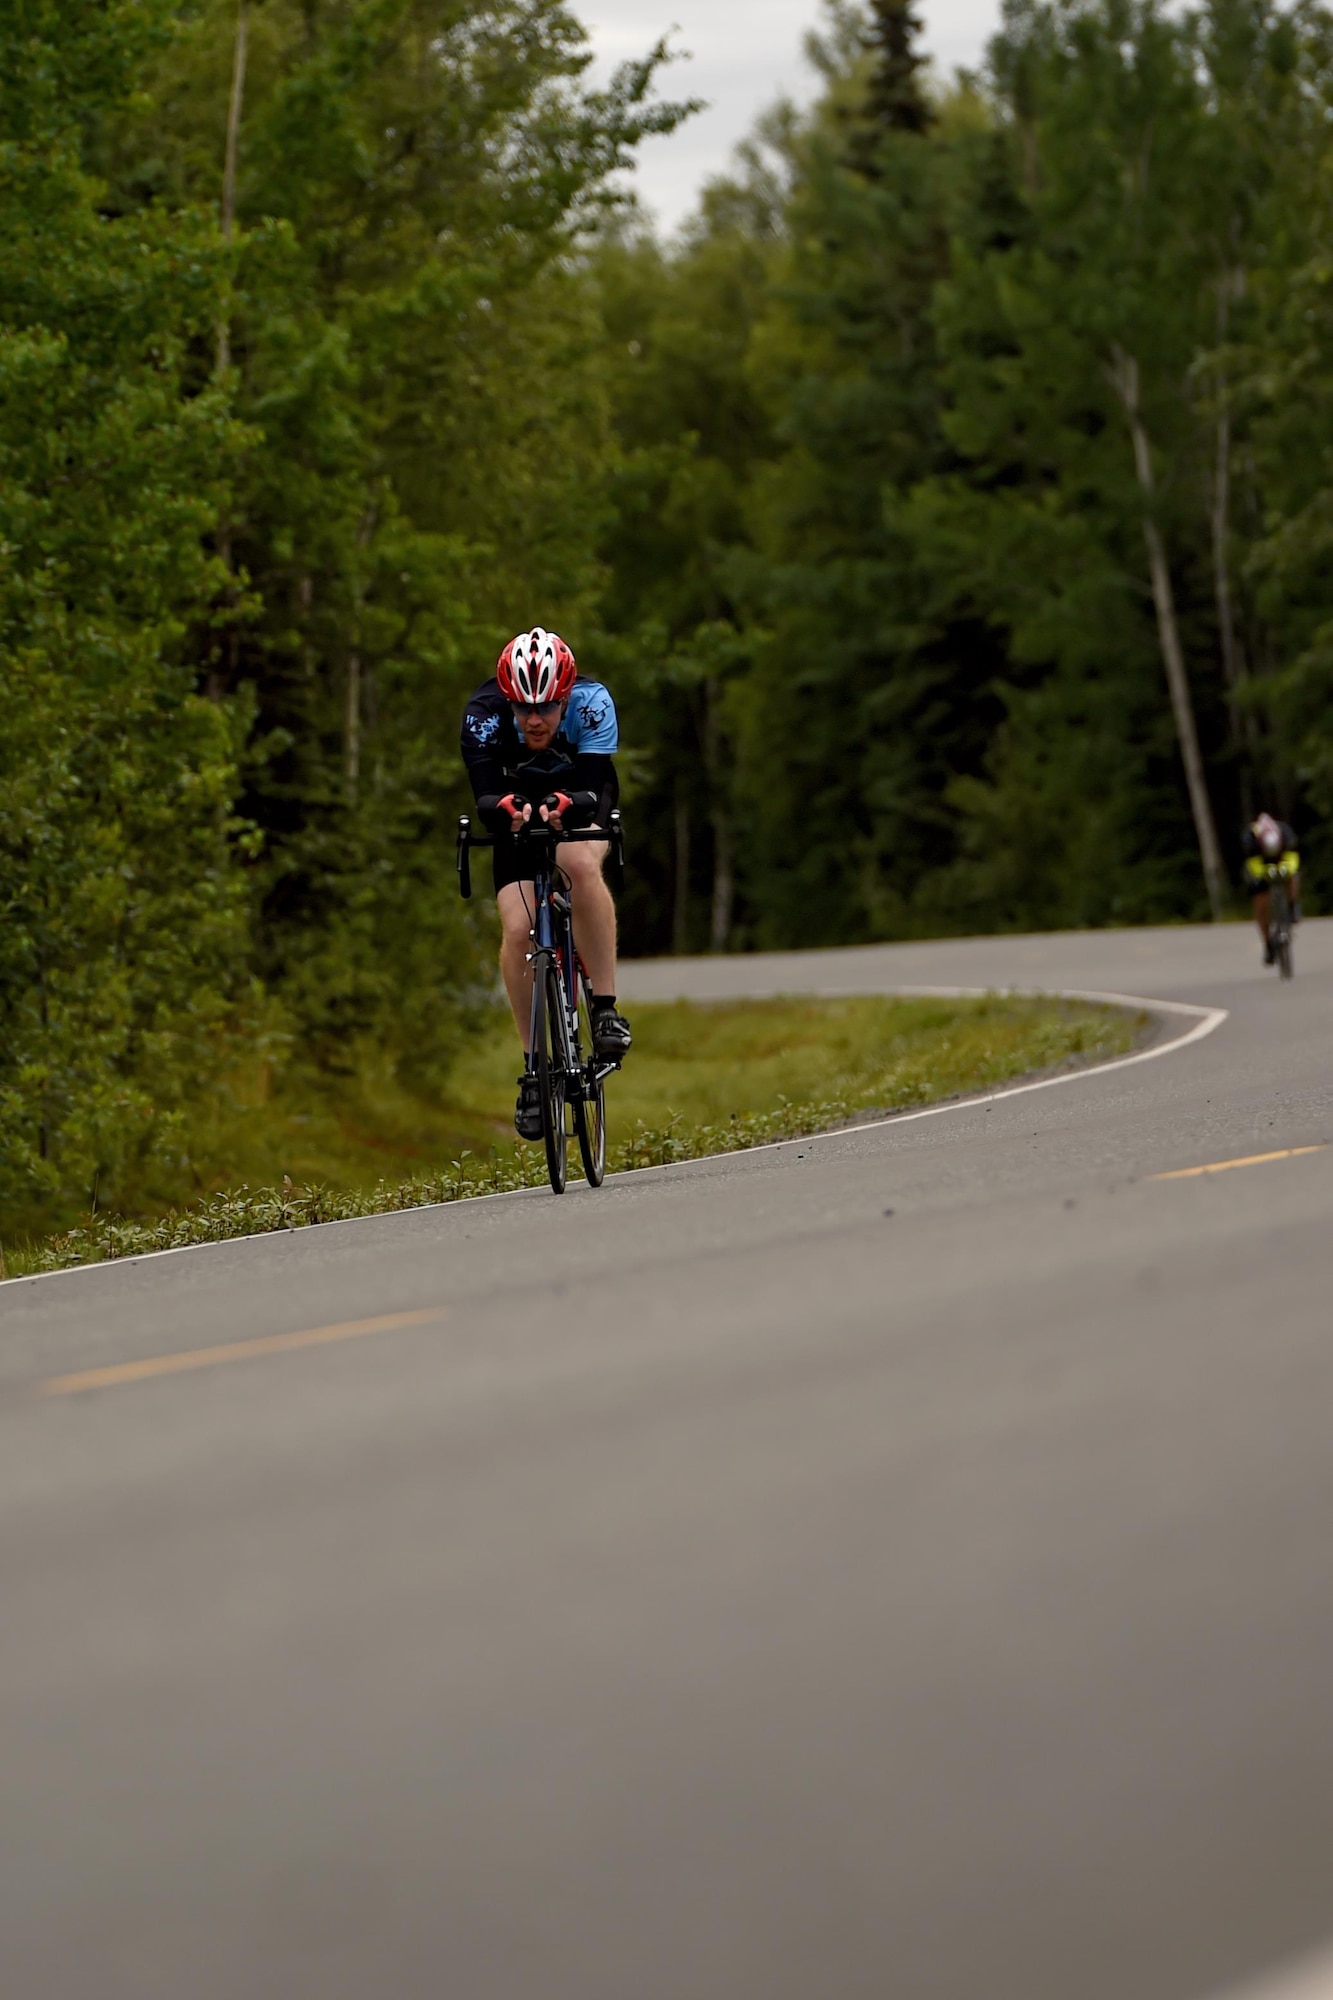 The Arctic Bicycle Club hosted a 10-mile time-trial race at the Moose Run Country Club at Joint Base Elmendorf-Richardson, Alaska, Aug. 3, 2017. For more than 15 years, the club has hosted road race events at JBER.